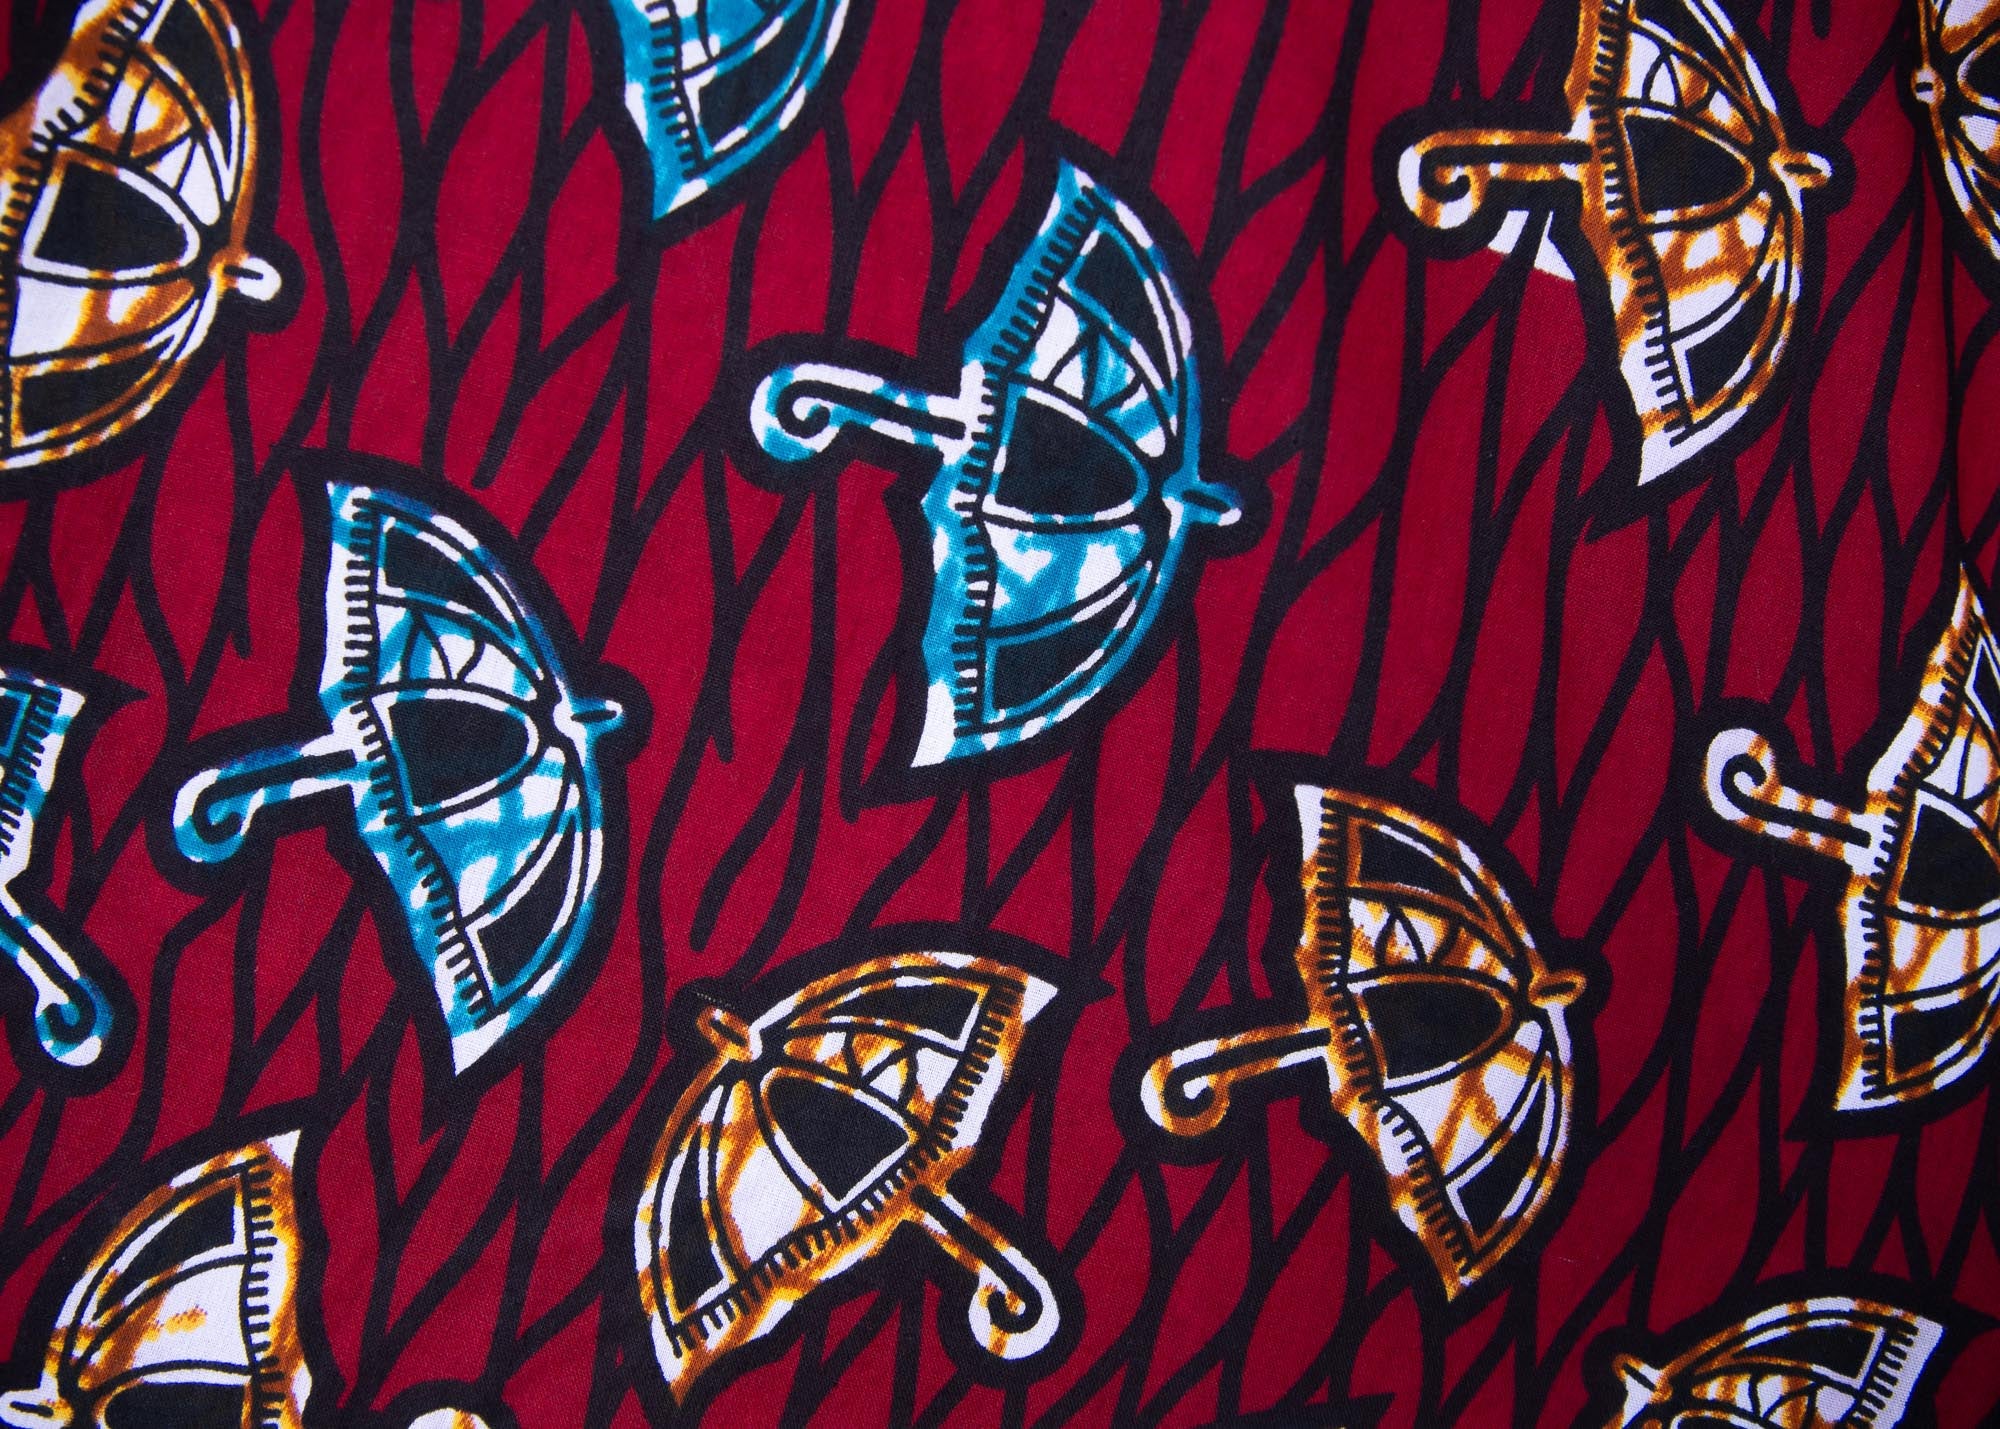 Close up display of red and black dress with umbrella design print